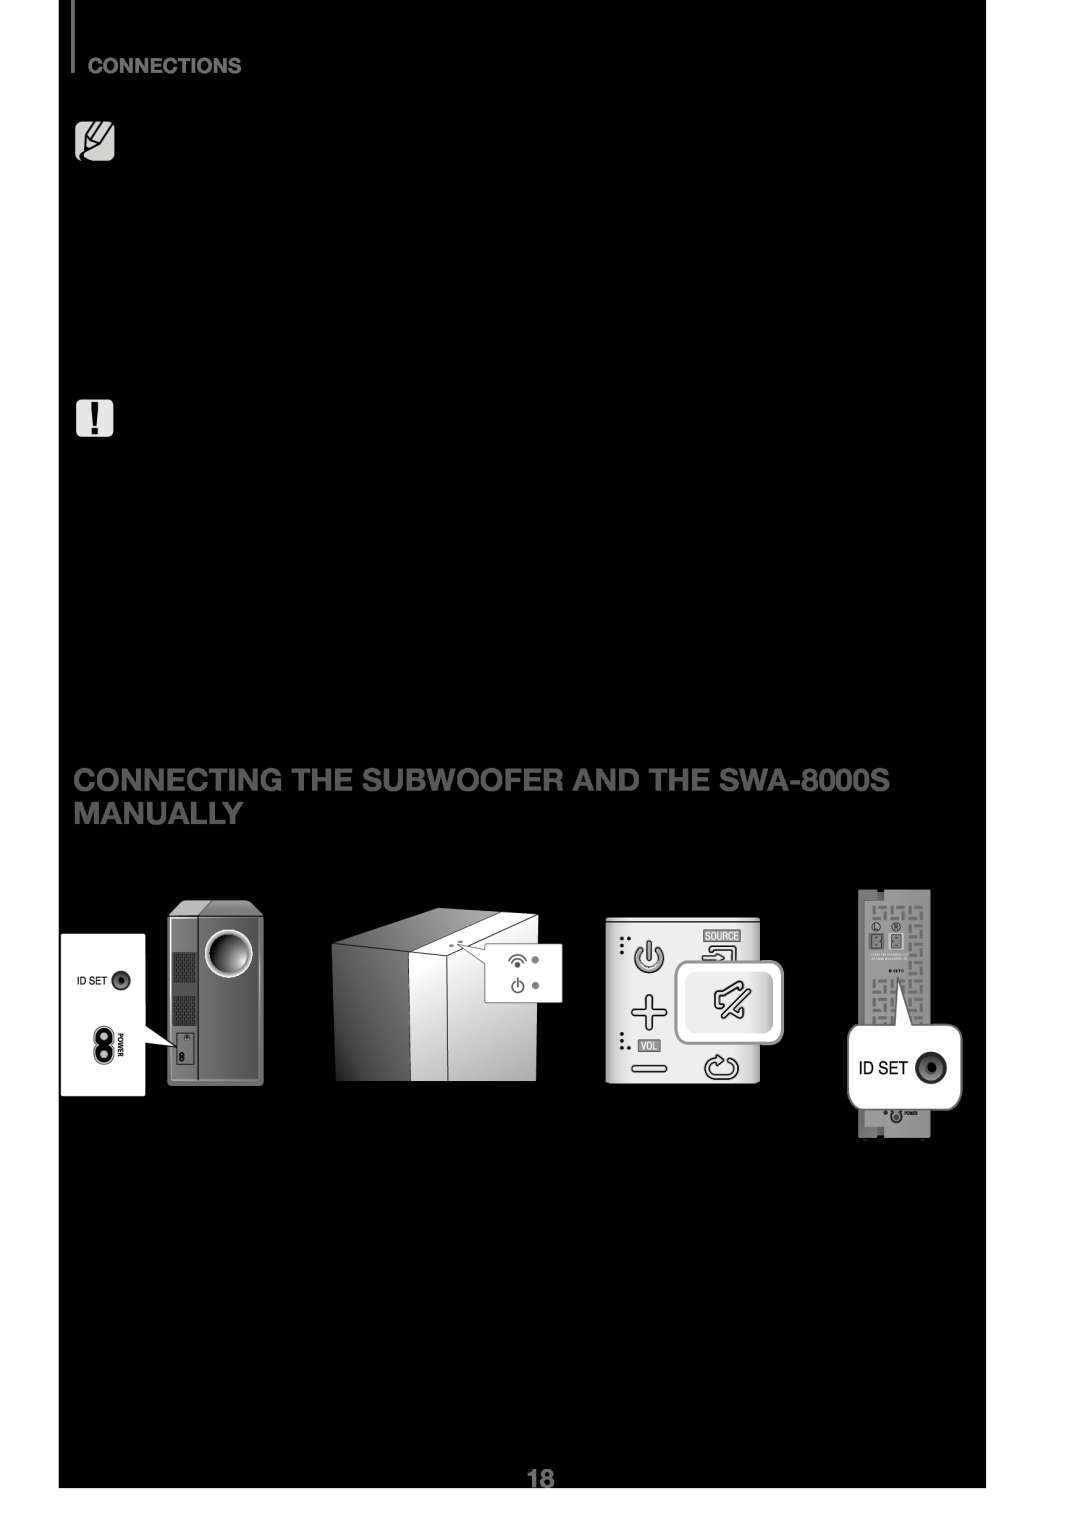 Samsung HW-J450/ZF, HW-K450/EN, HW-J450/EN manual CONNECTING THE SUBWOOFER AND THE SWA-8000S SOLD SEPARATELY, Connections 